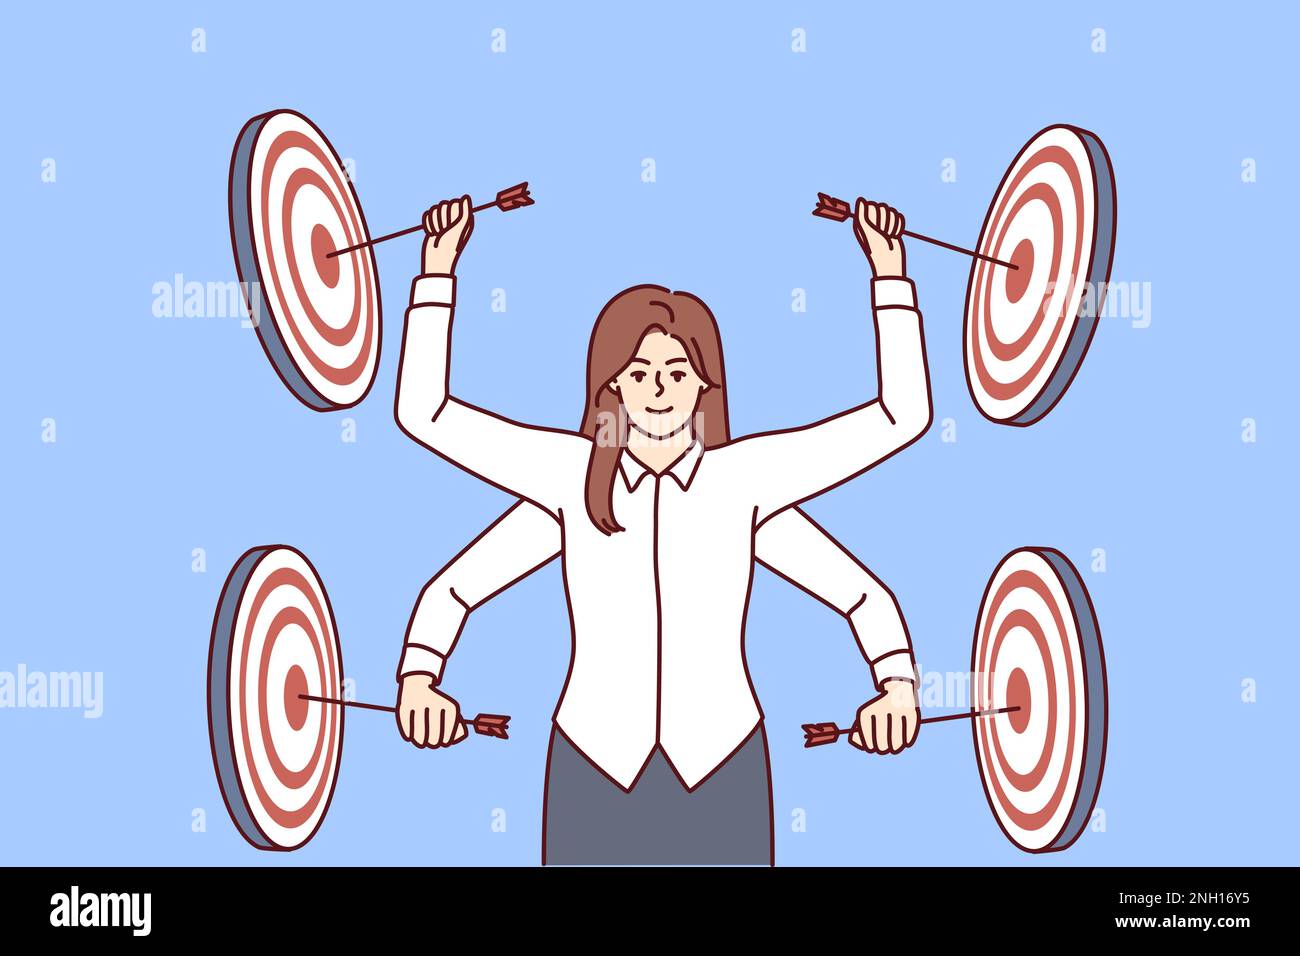 Professional multi-armed woman manager strikes performs several business goals at same time multitasking. girl among targets for darts symbolizes concentration on professional skills and goals  Stock Vector